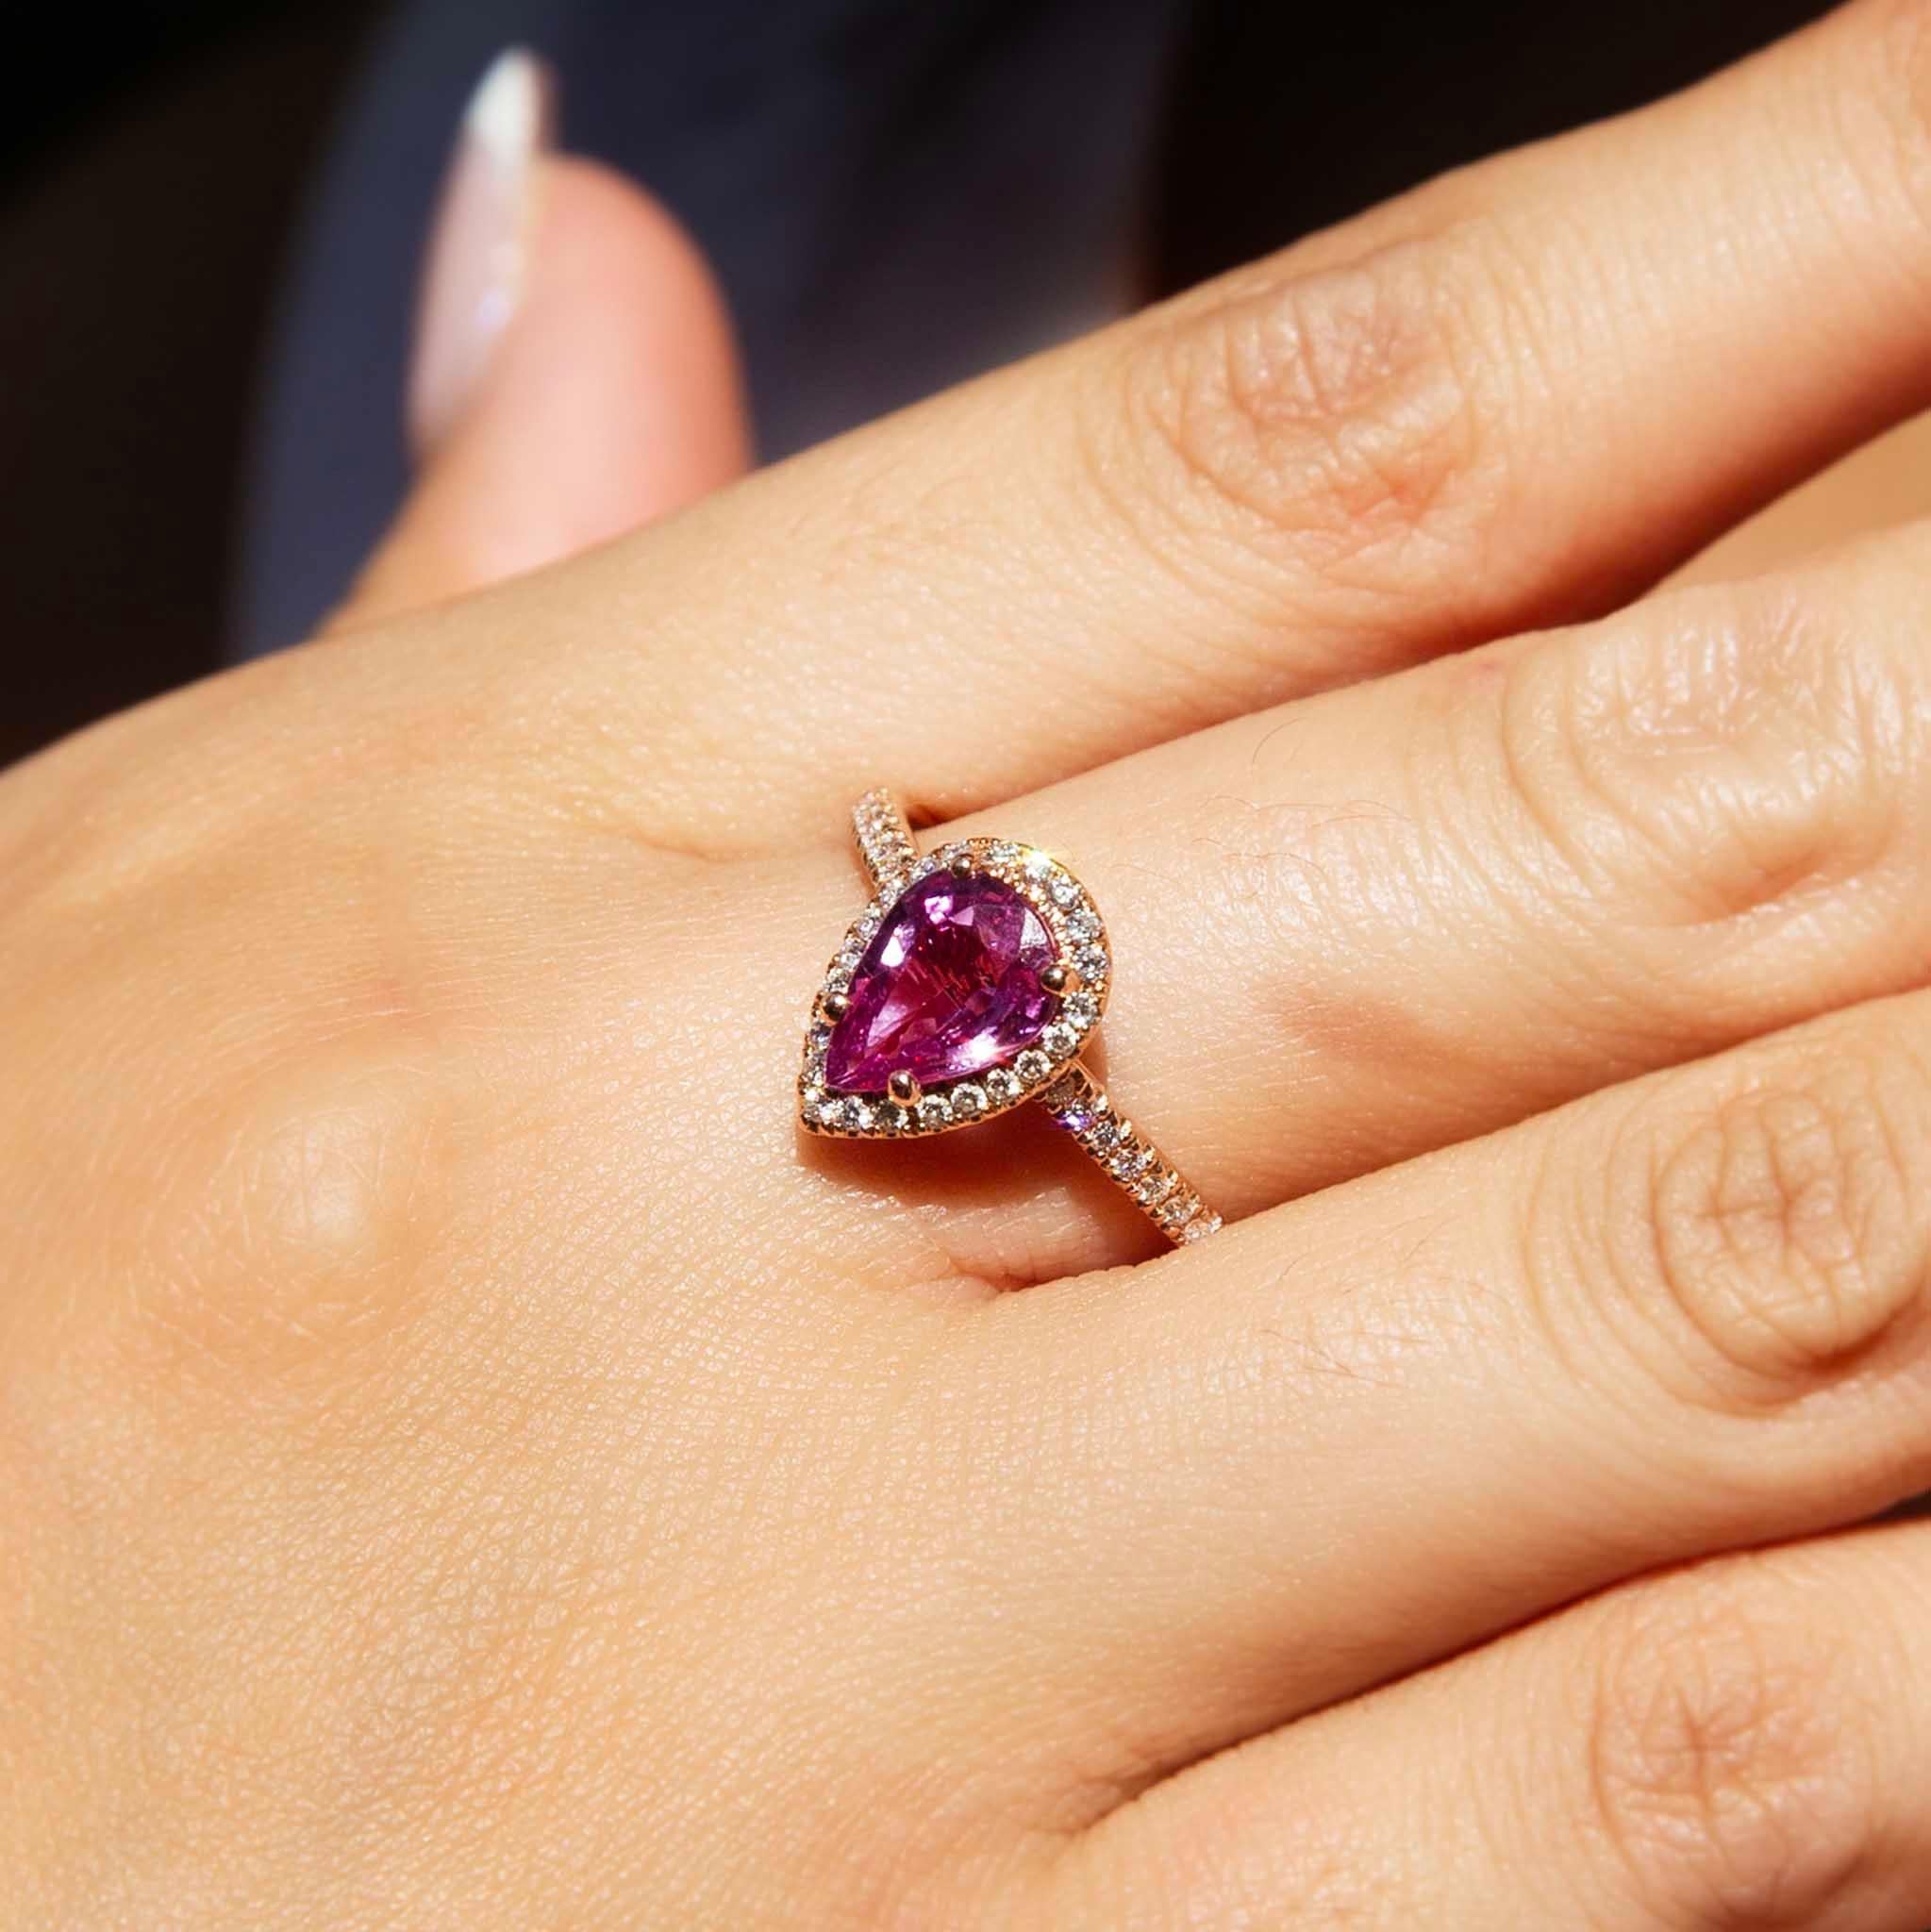 Intense love and compassion ignite in a gorgeous pear cut pink sapphire encompassed by a stunning border of brilliant diamonds. Finished with a plethora of diamonds down her perfect shoulders, The Wanda Ring will truly take your breath away.

The